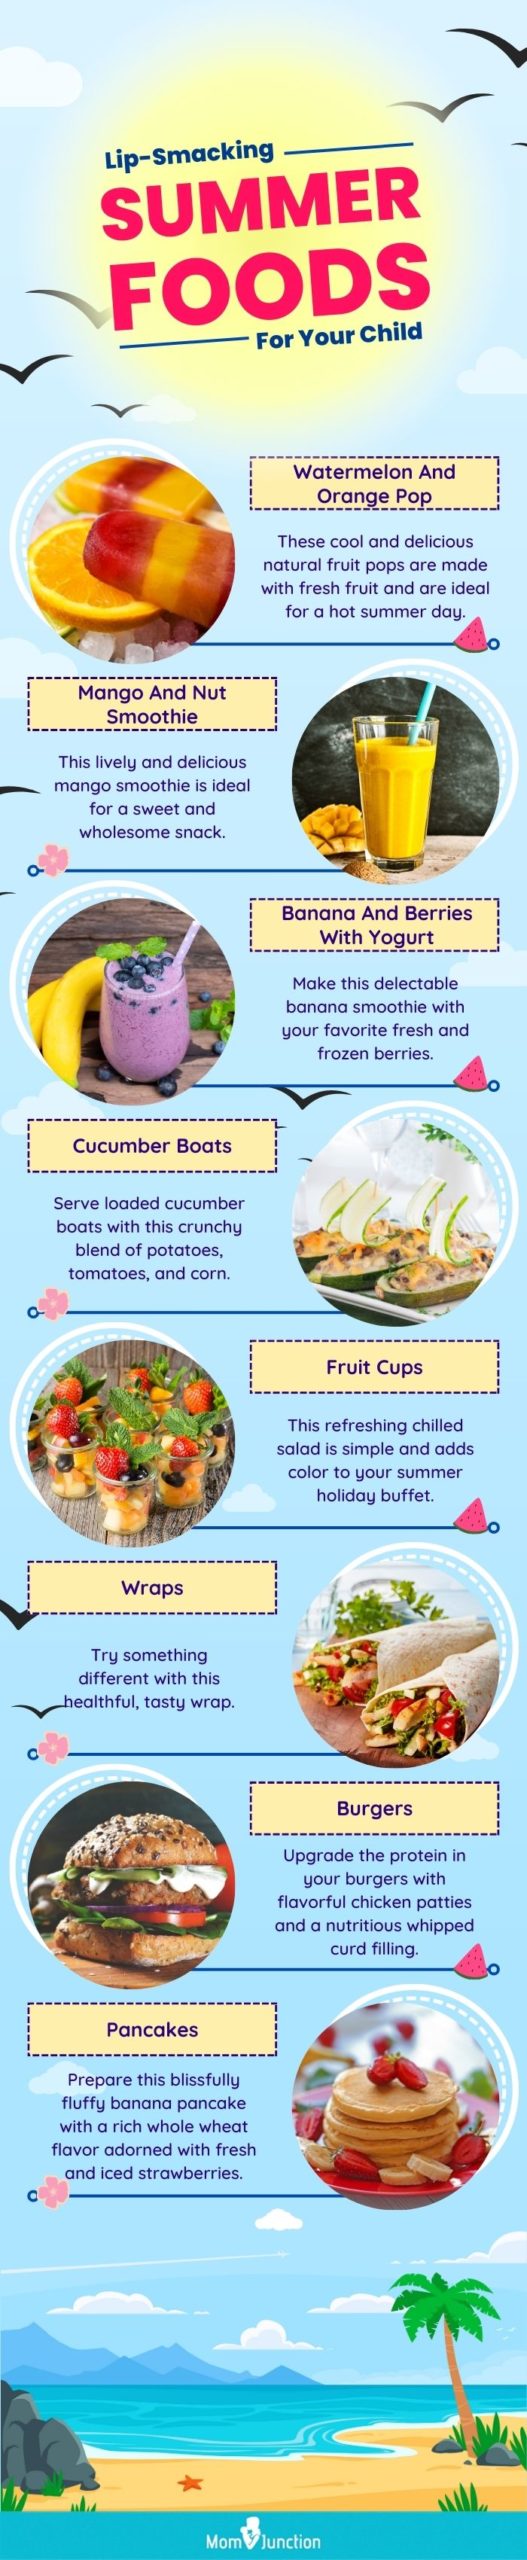 https://www.momjunction.com/wp-content/uploads/2014/08/Infographic-Delicious-Summer-Food-For-Children-scaled.jpg